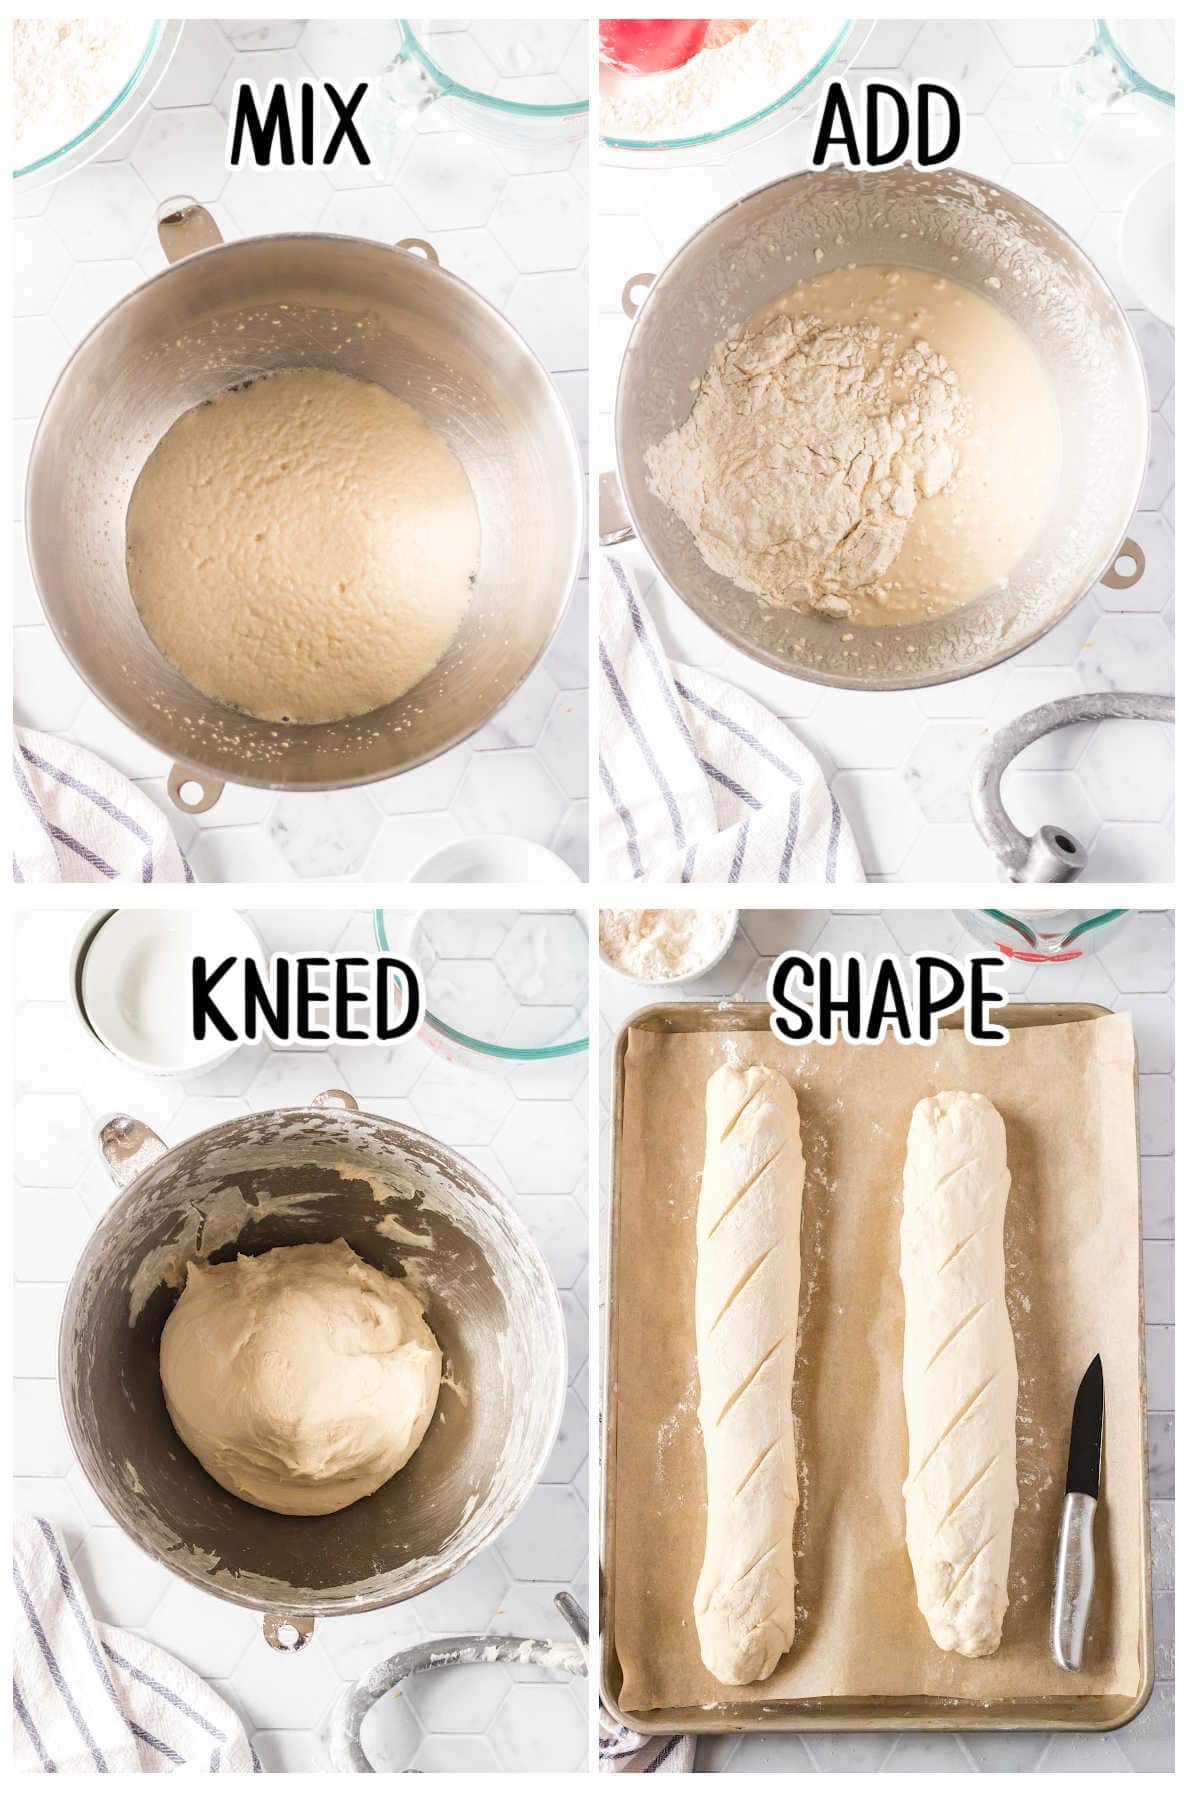 30 minute baguette step by step instructions.